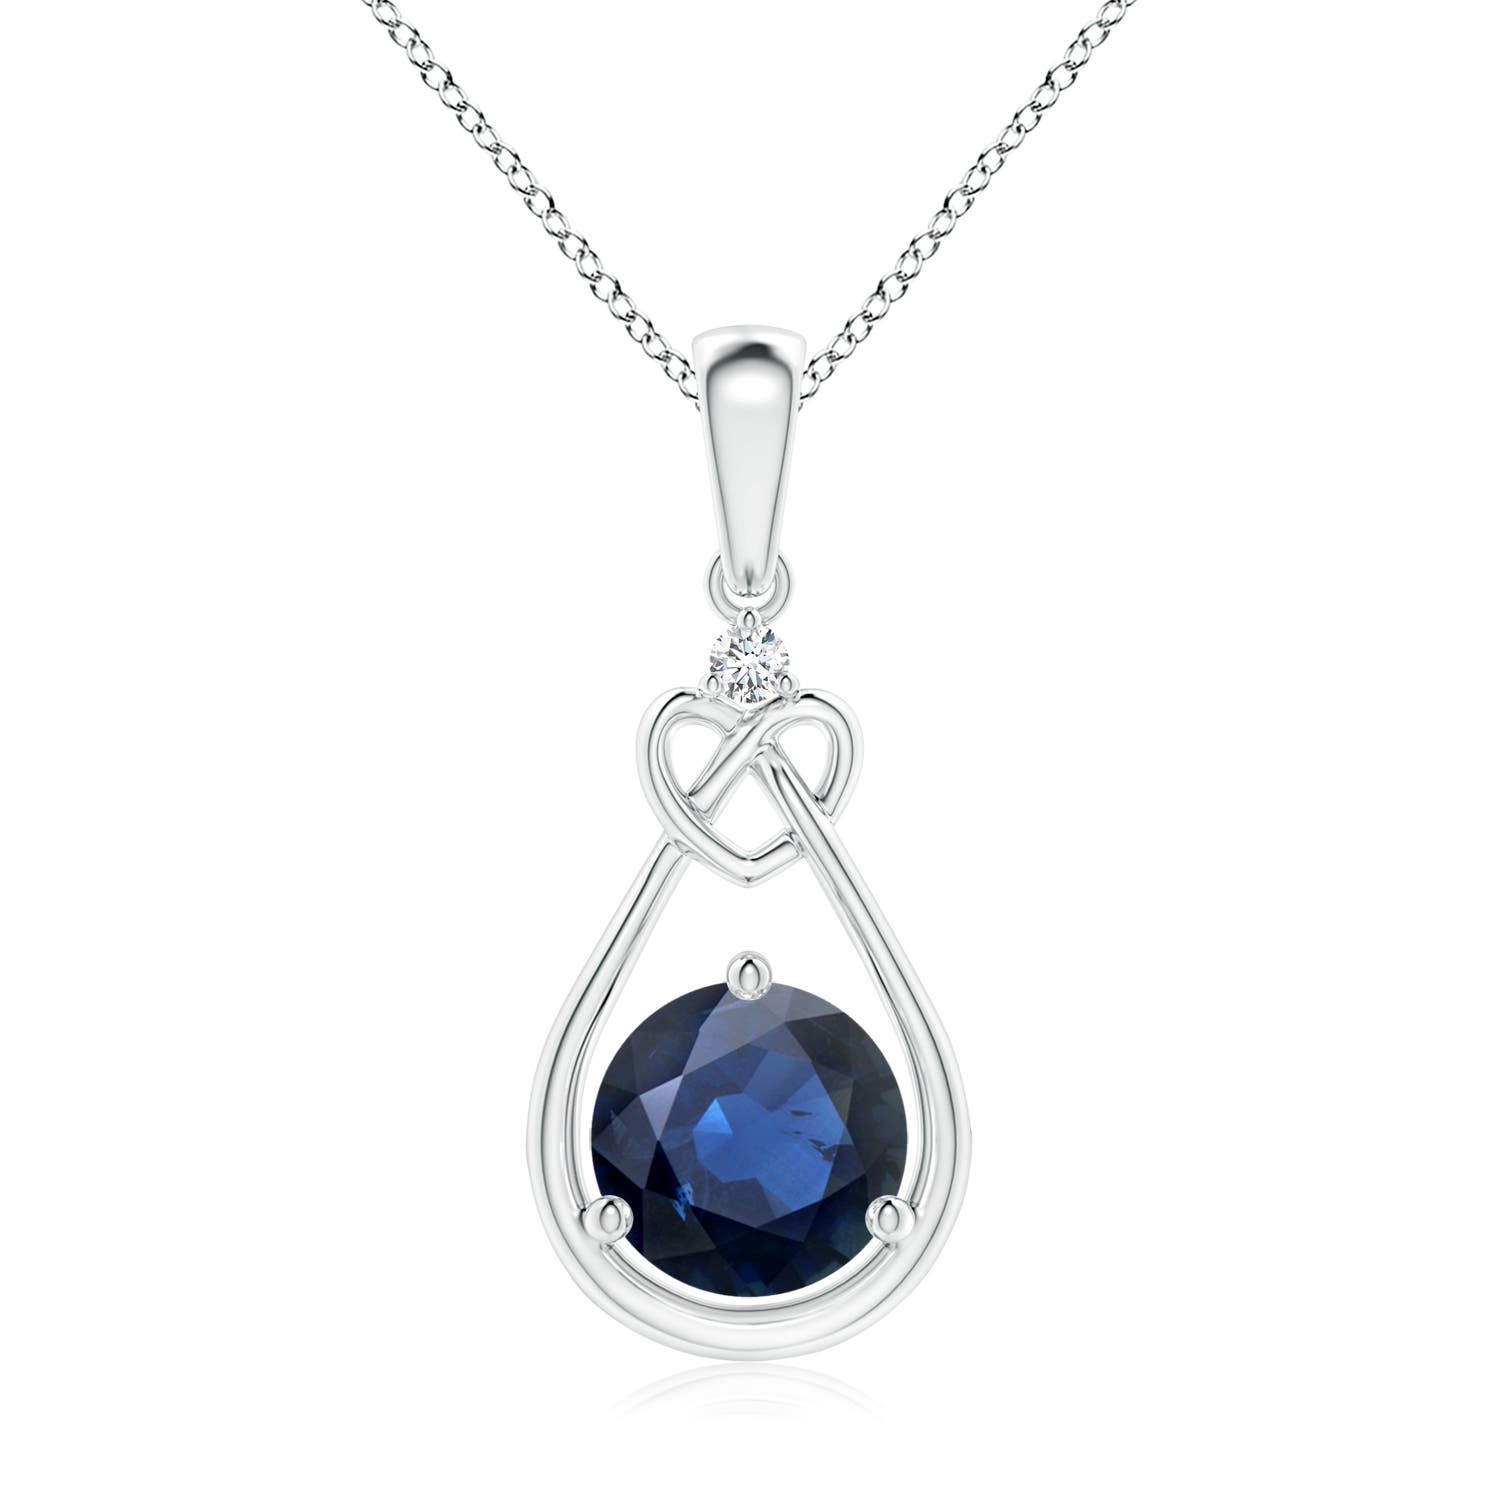 AA - Blue Sapphire / 1.62 CT / 14 KT White Gold